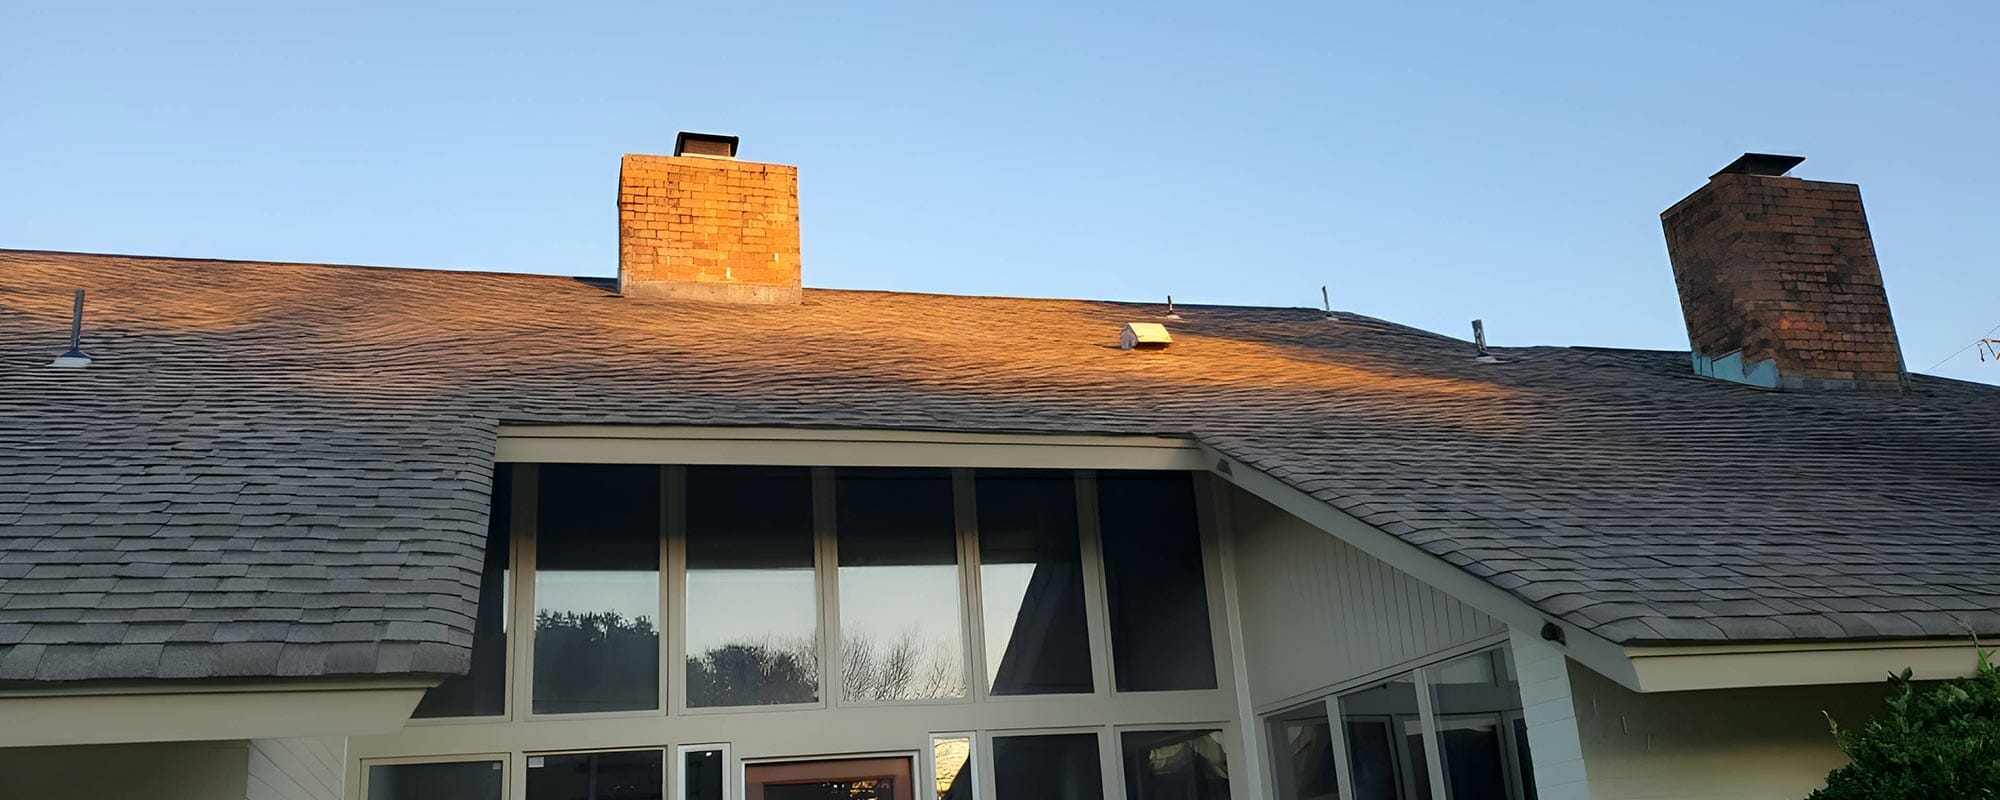 trusted roofing company Franklin, VA